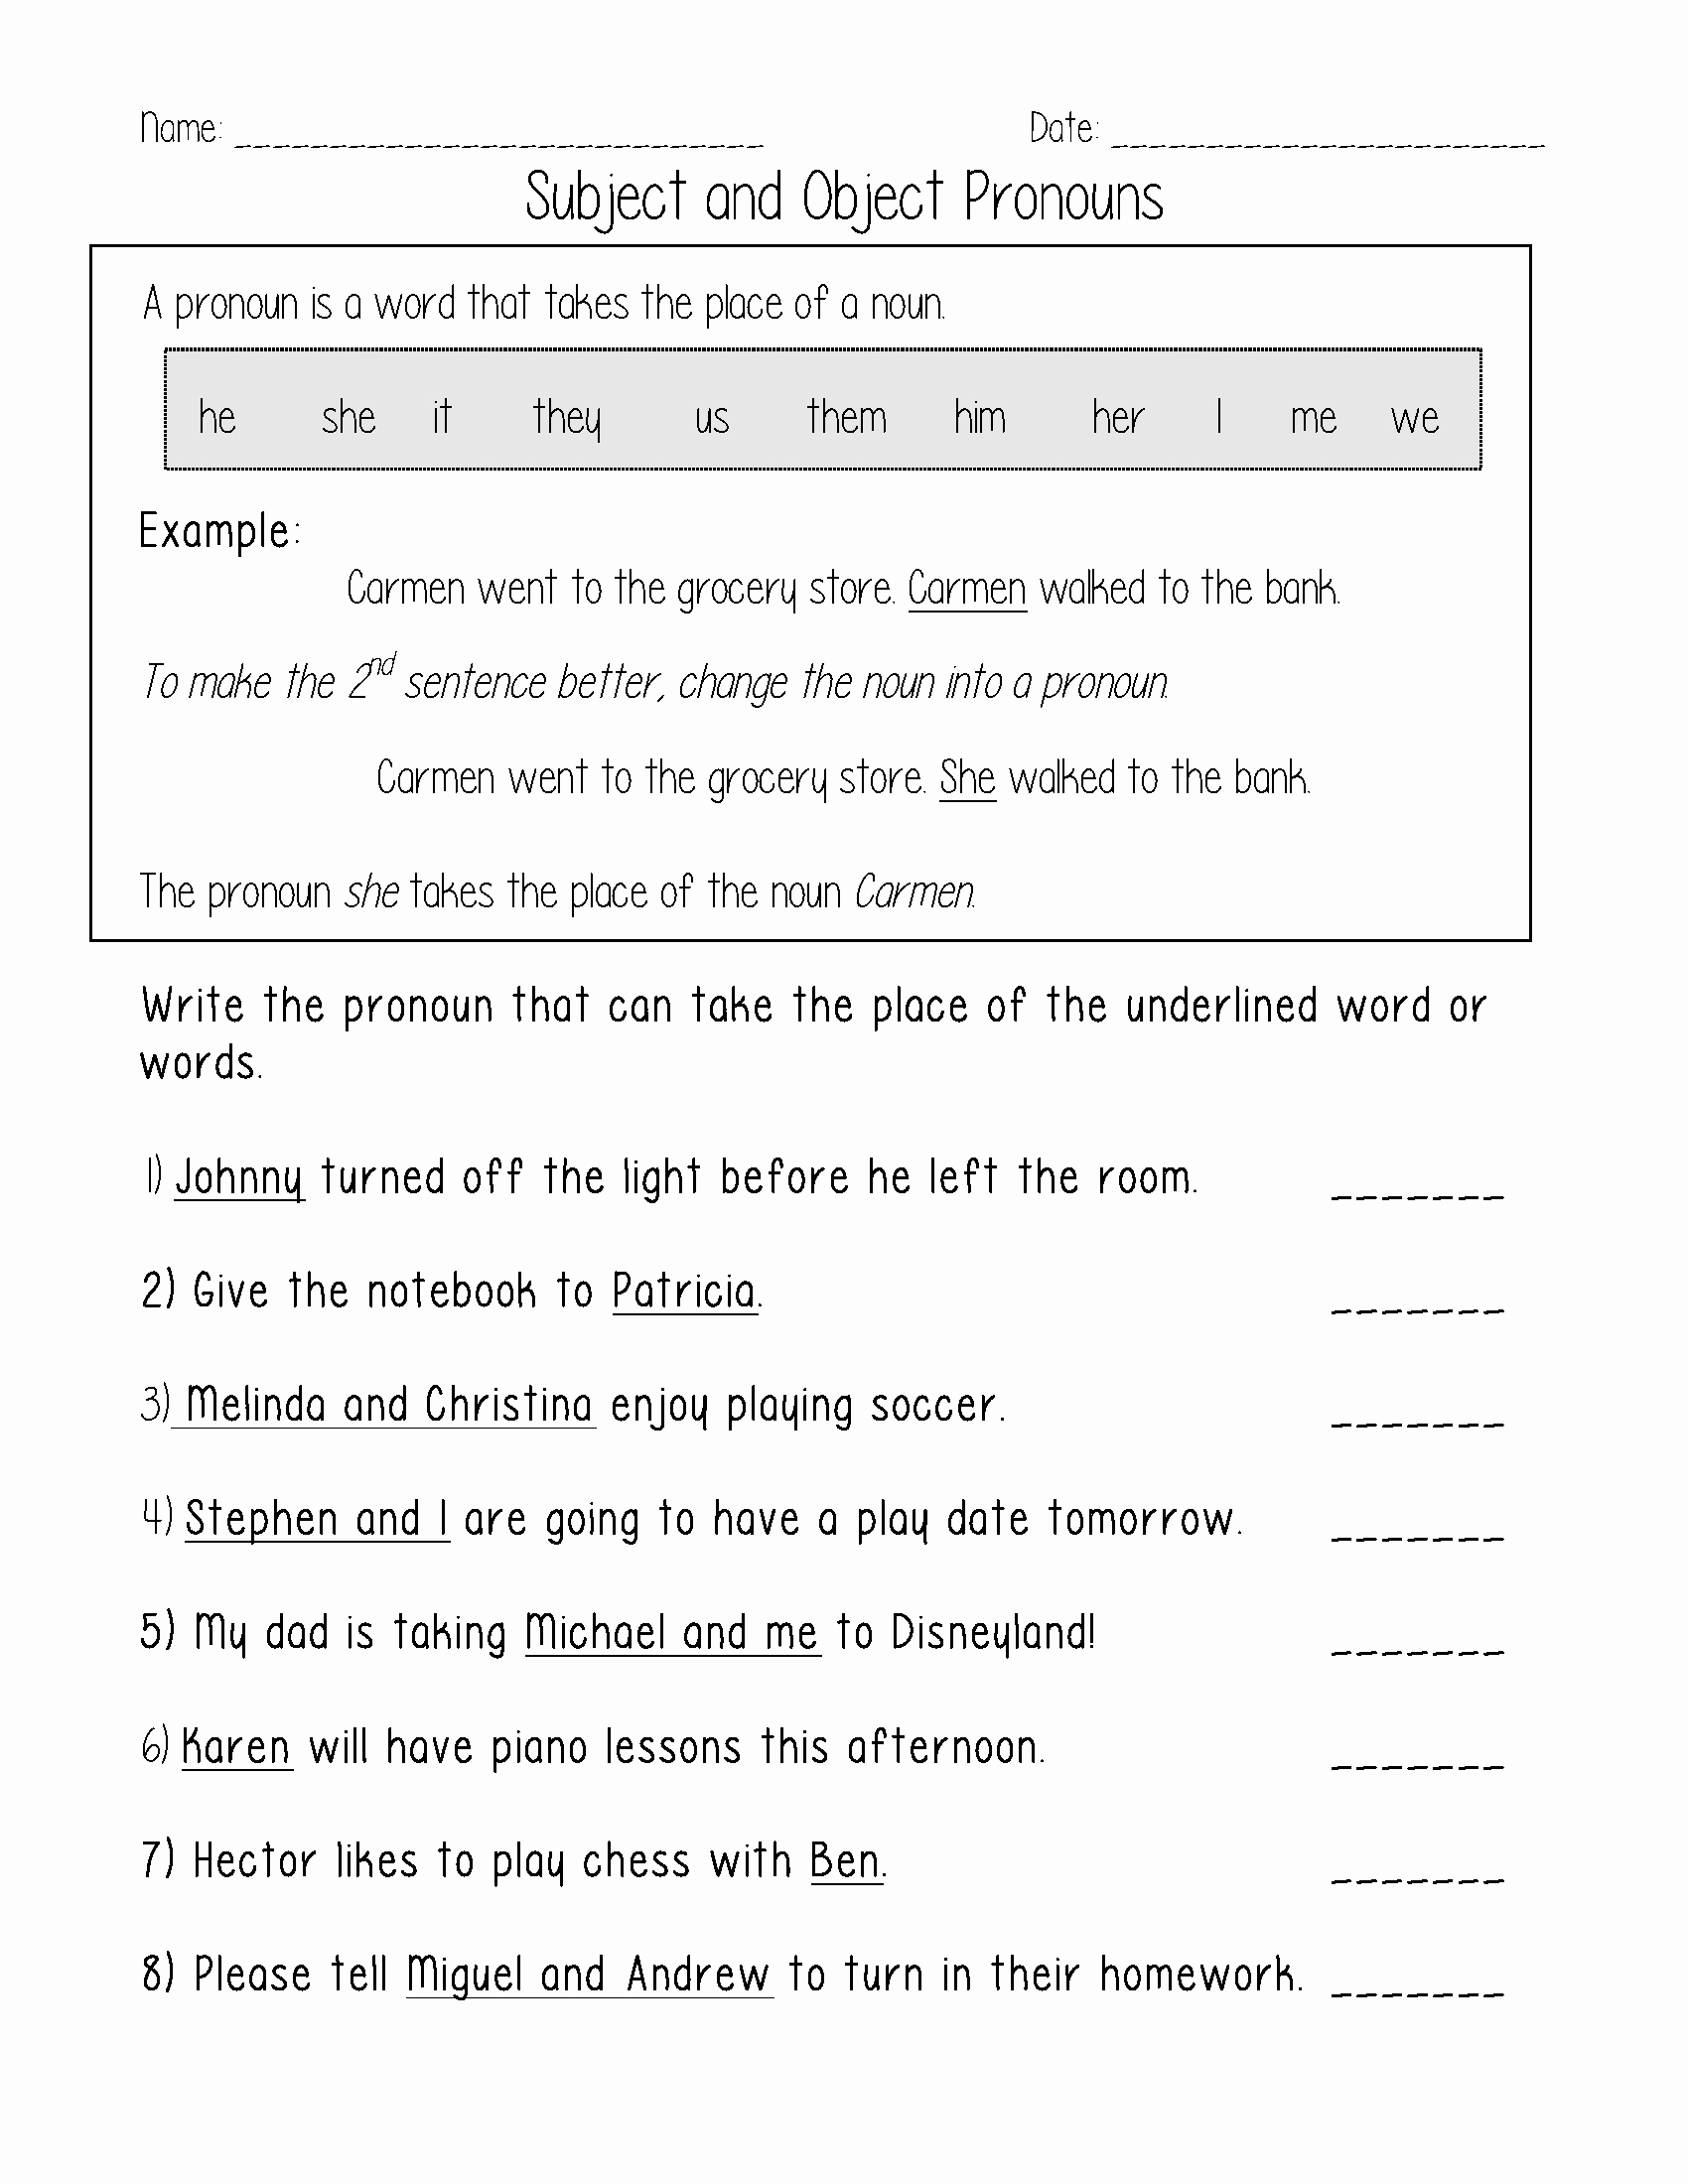 Pronoun Worksheet for 2nd Grade Best Of Free Printable Pronoun Worksheets for 2nd Grade